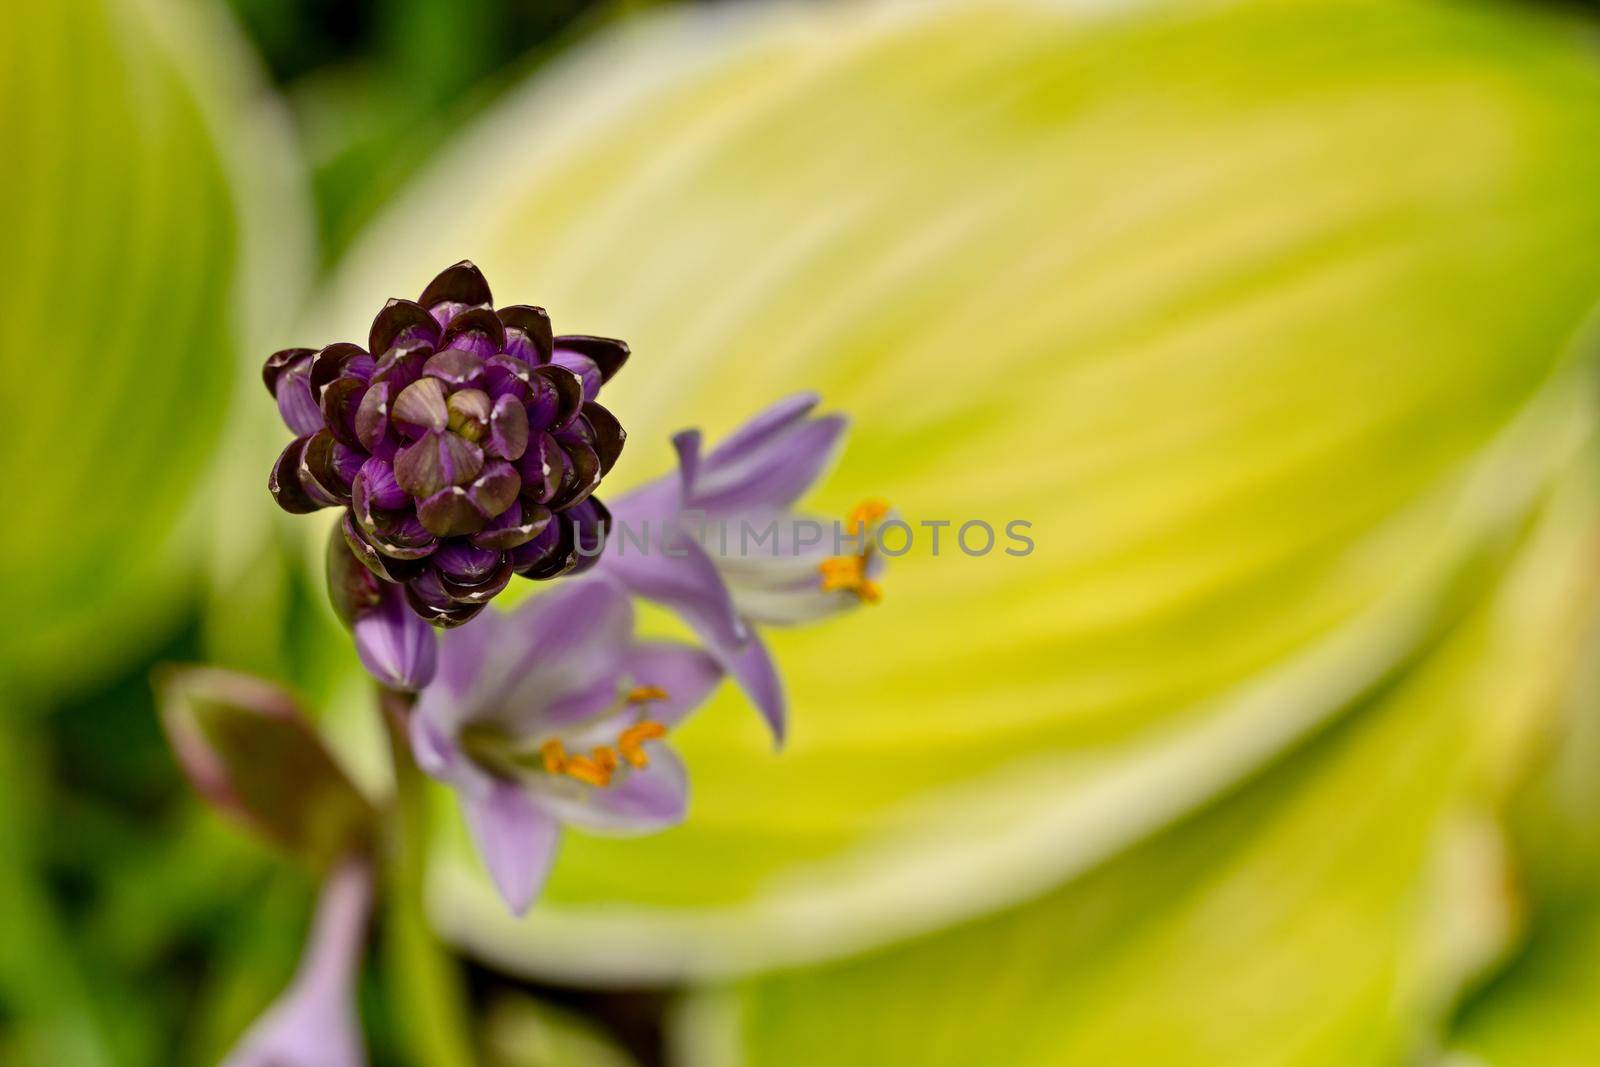 Blossoming garden purple hosta flower with blurred yellow leaves as a background. Close-up macro view.